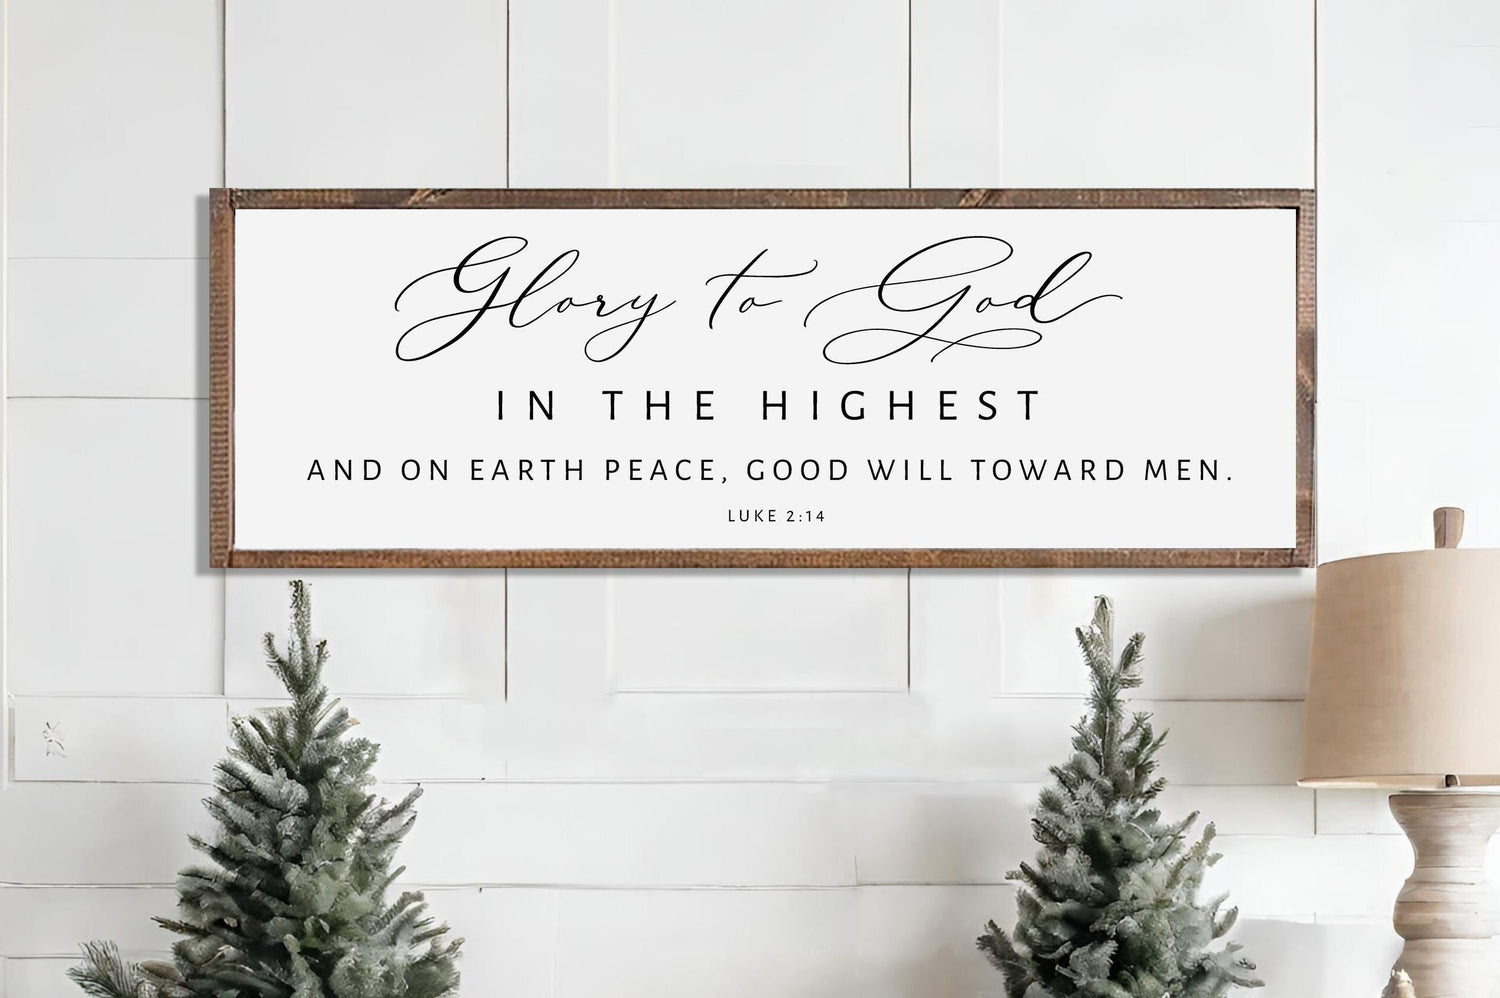 Glory to God In the highest, and on earth peace, good will toward men. Christmas Wood Sign. Available in several sizes. Made of Wood.